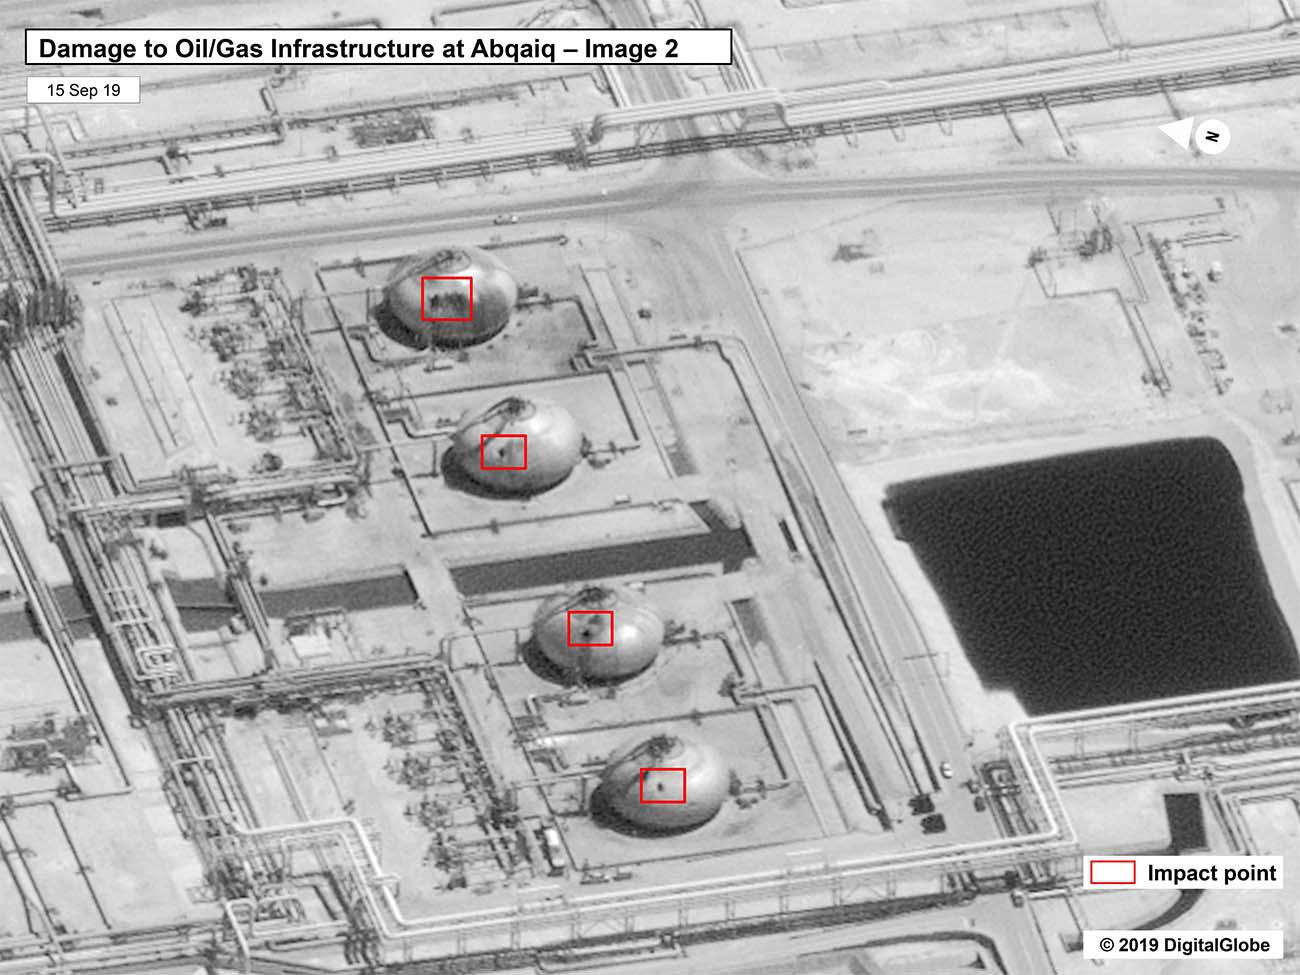 Satellite image of the damage to the infrastructure at Saudi Aramco's Abaqaiq oil processing facility in Buqyaq, Saudi Arabia